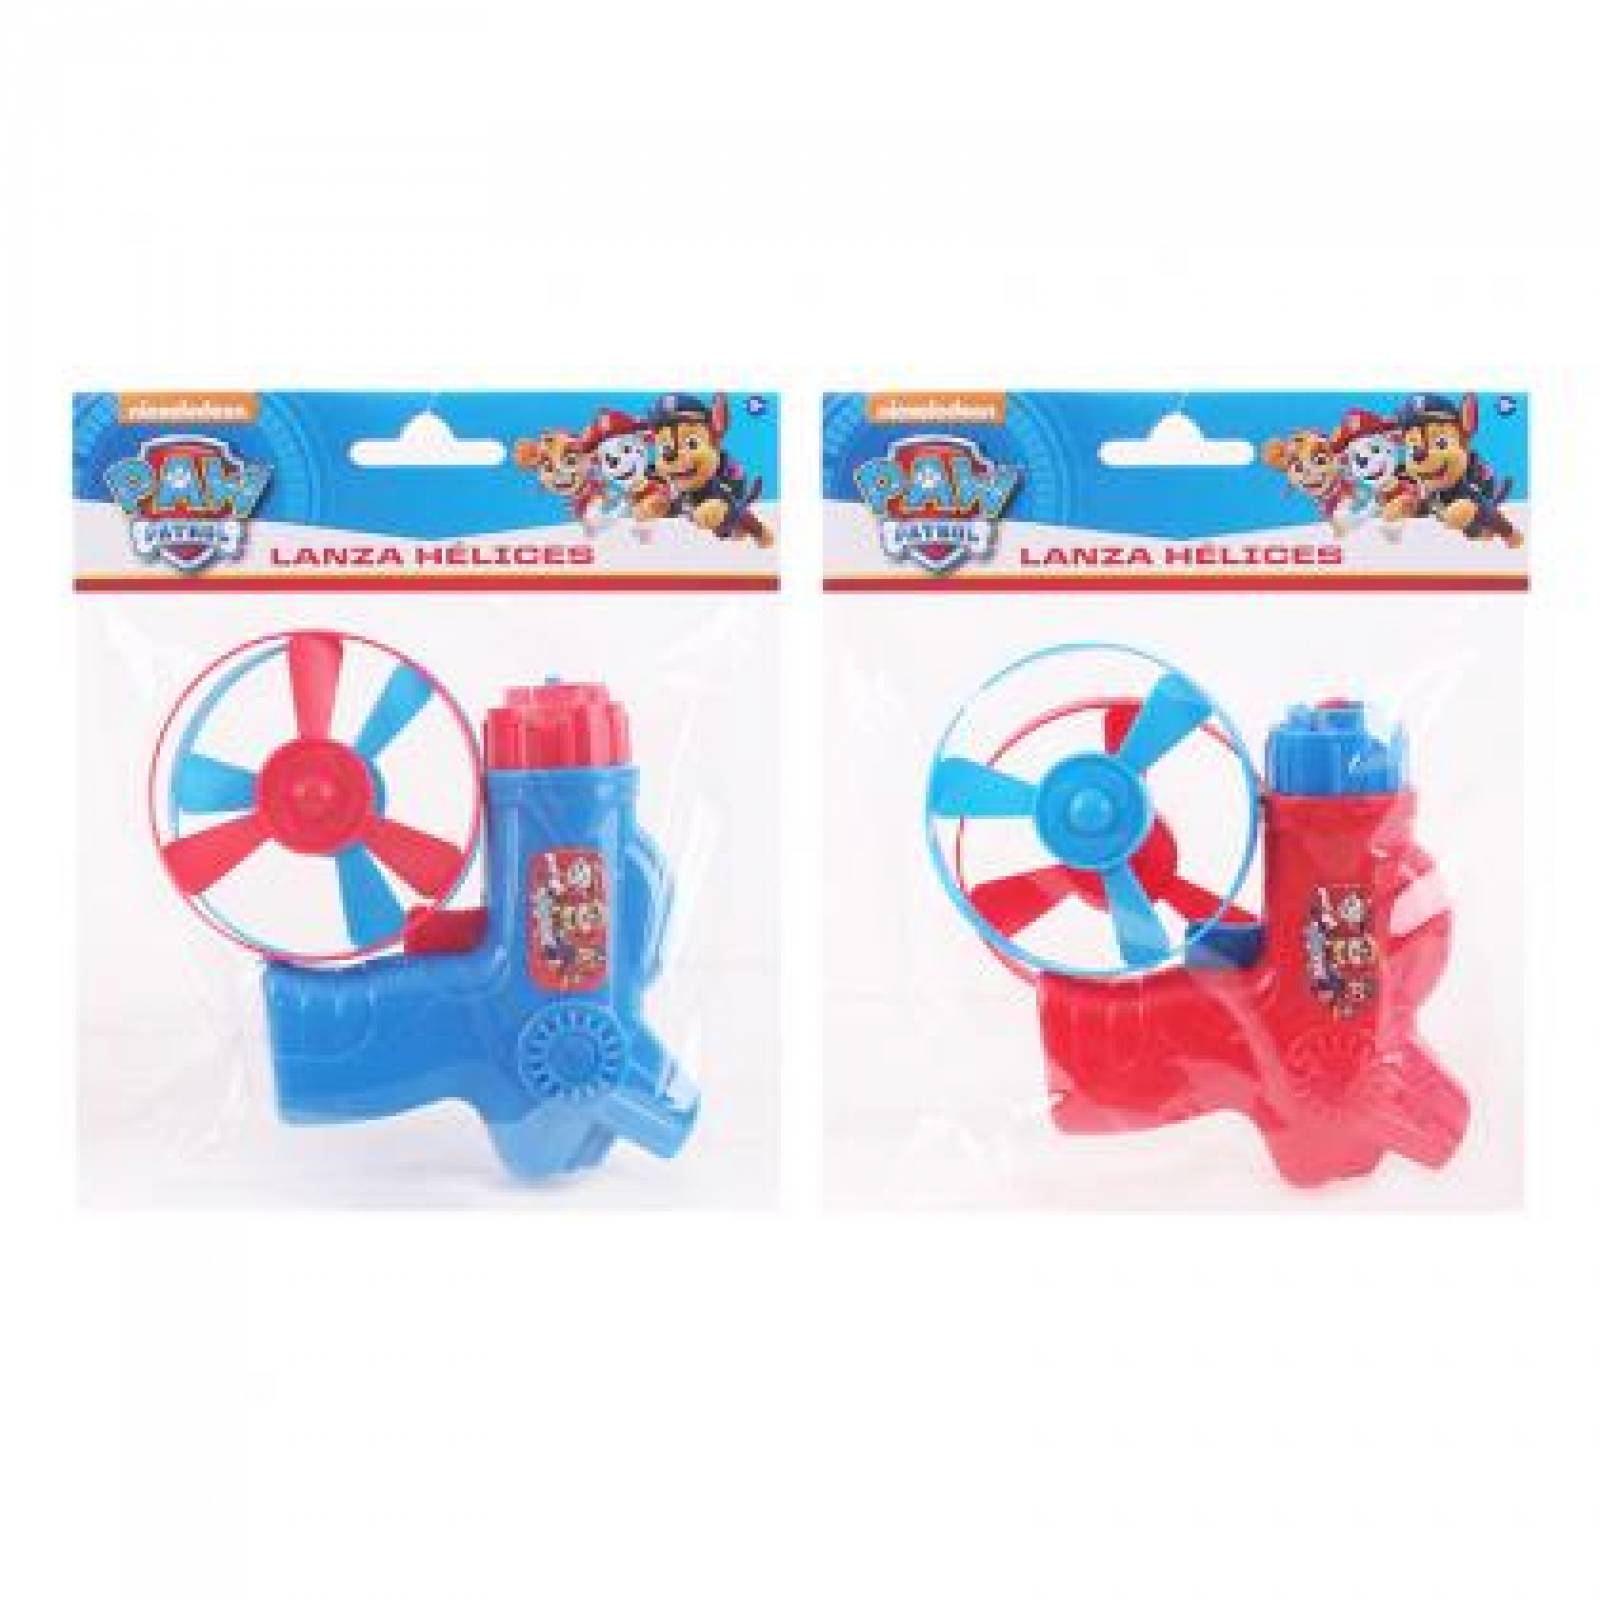 Lanza helices paw patrol